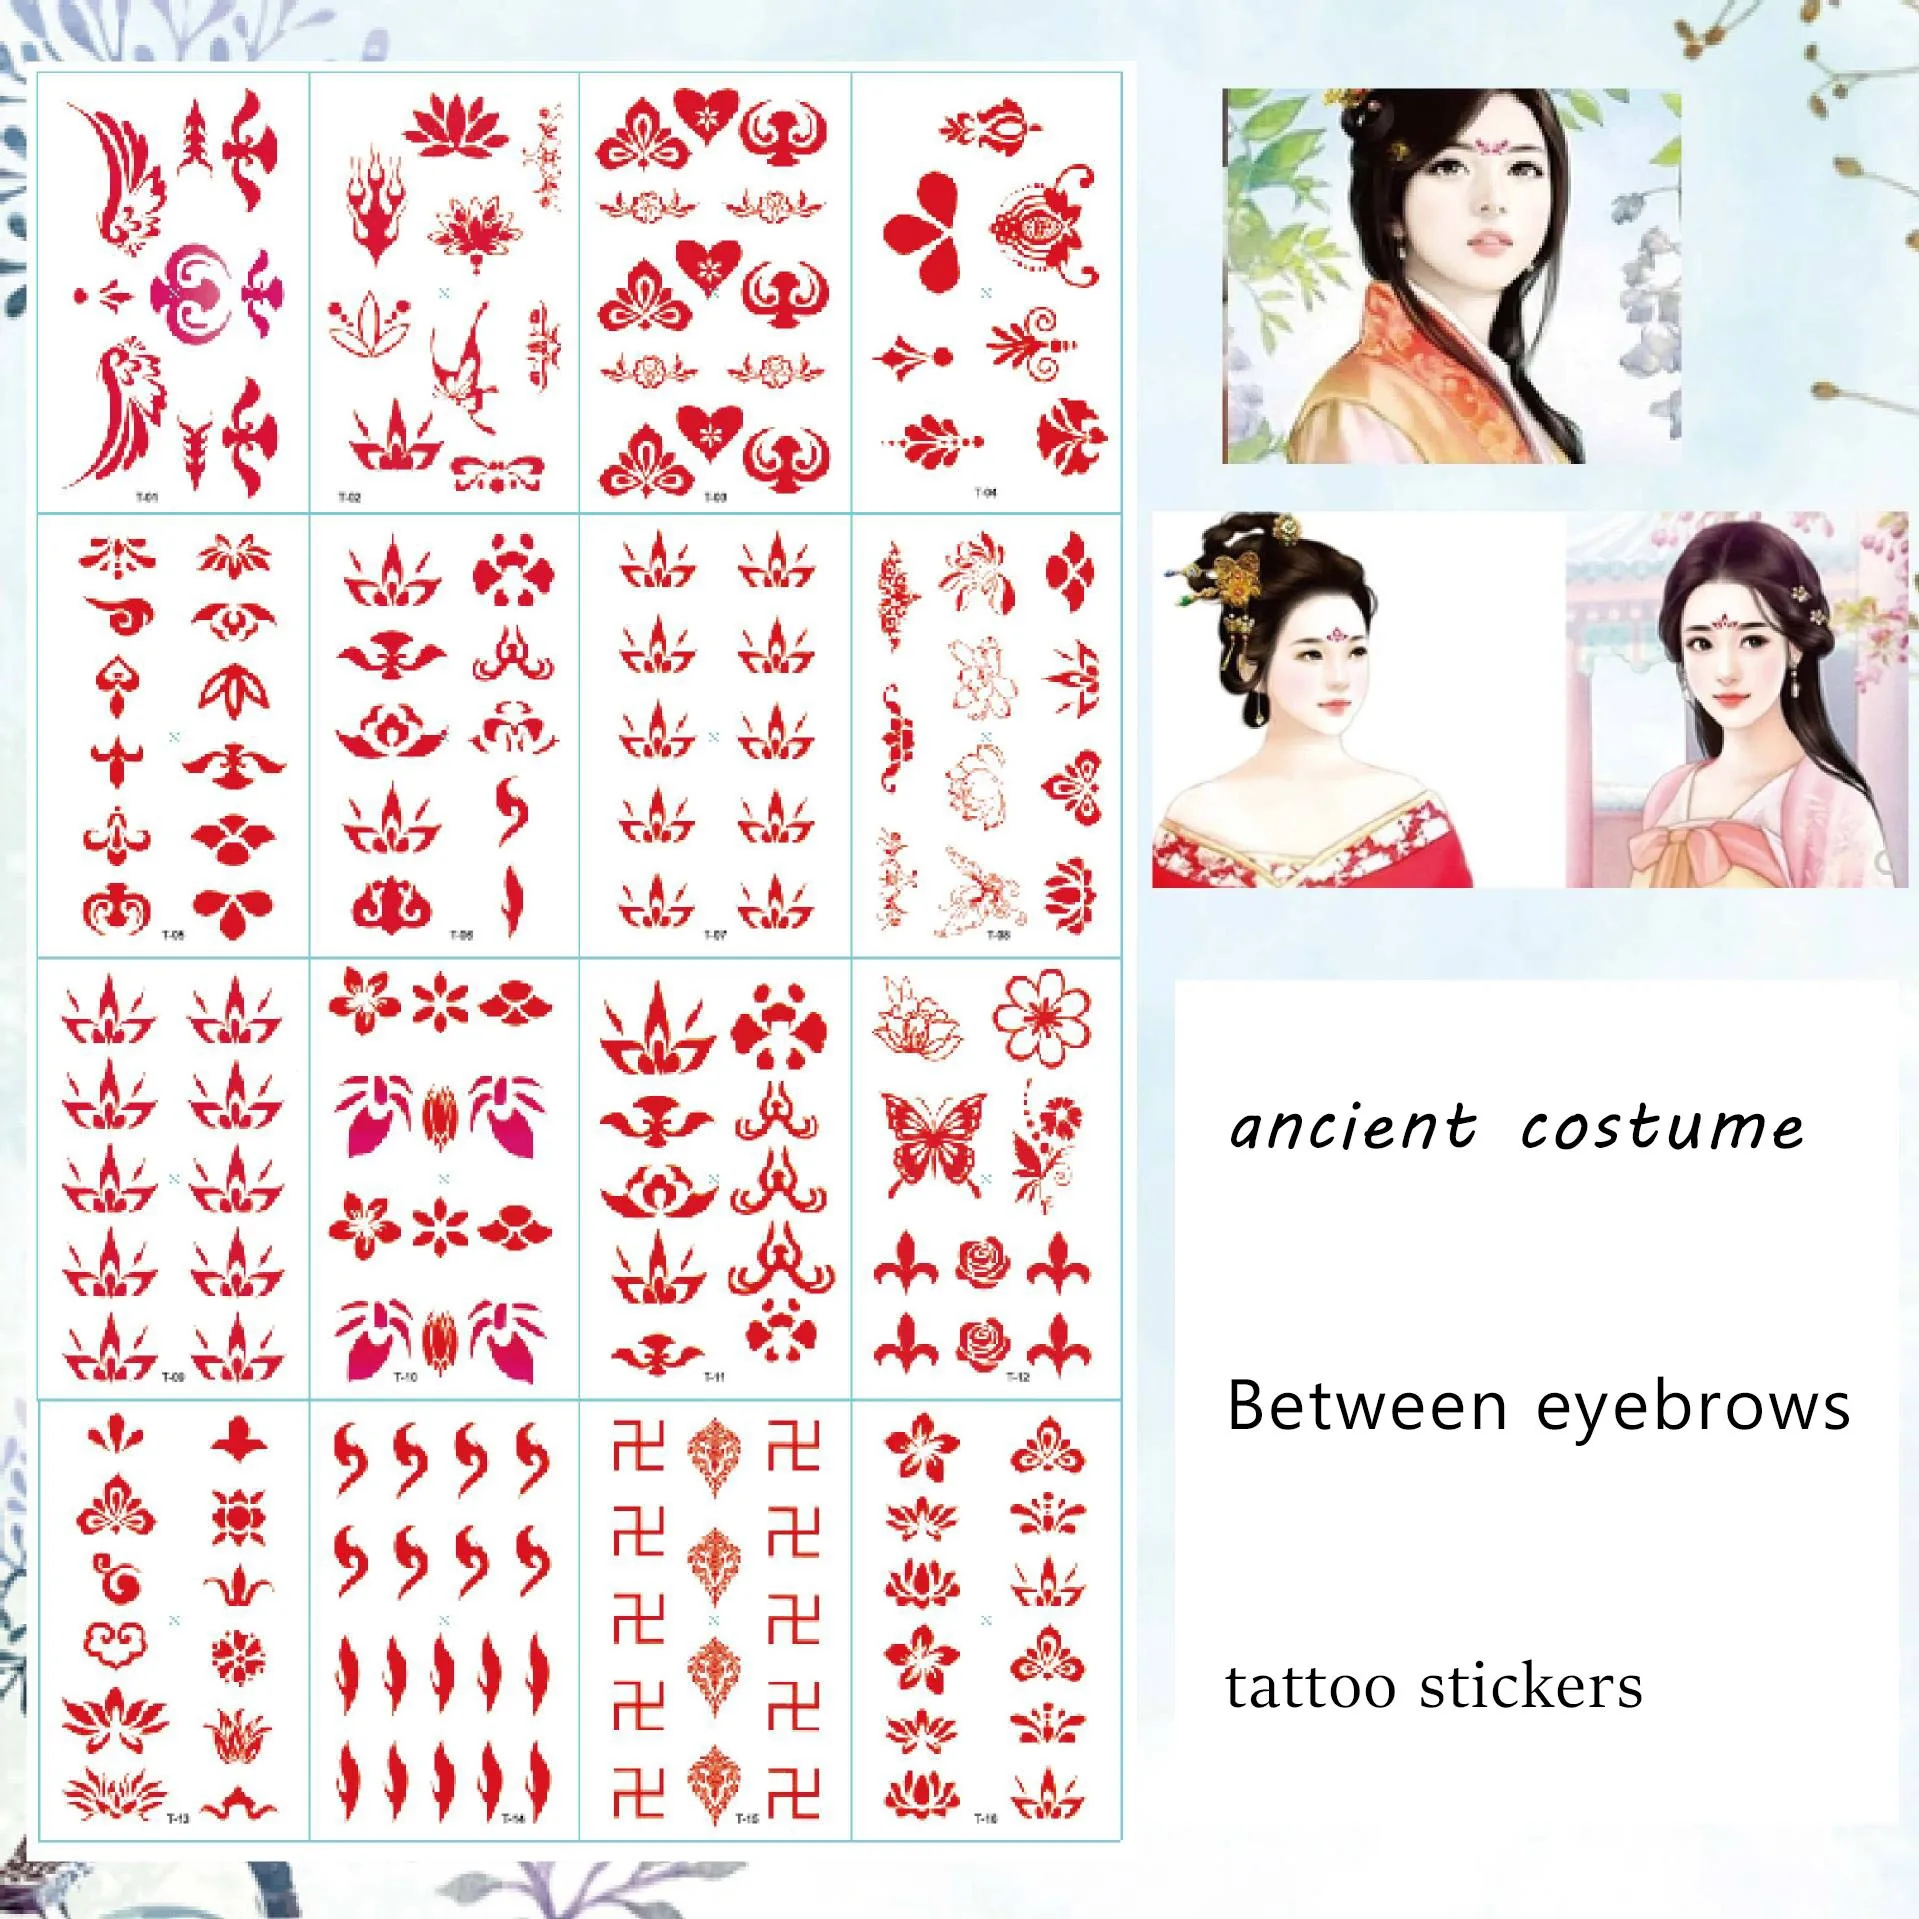 16 ancient costume eyebrow tattoo temporary waterproof tattoo stickers sexy cute girl flower tin forehead jewelry stickers always be yourself unless you can be a fox then always be fox apron costume waiter aprons waterproof apron